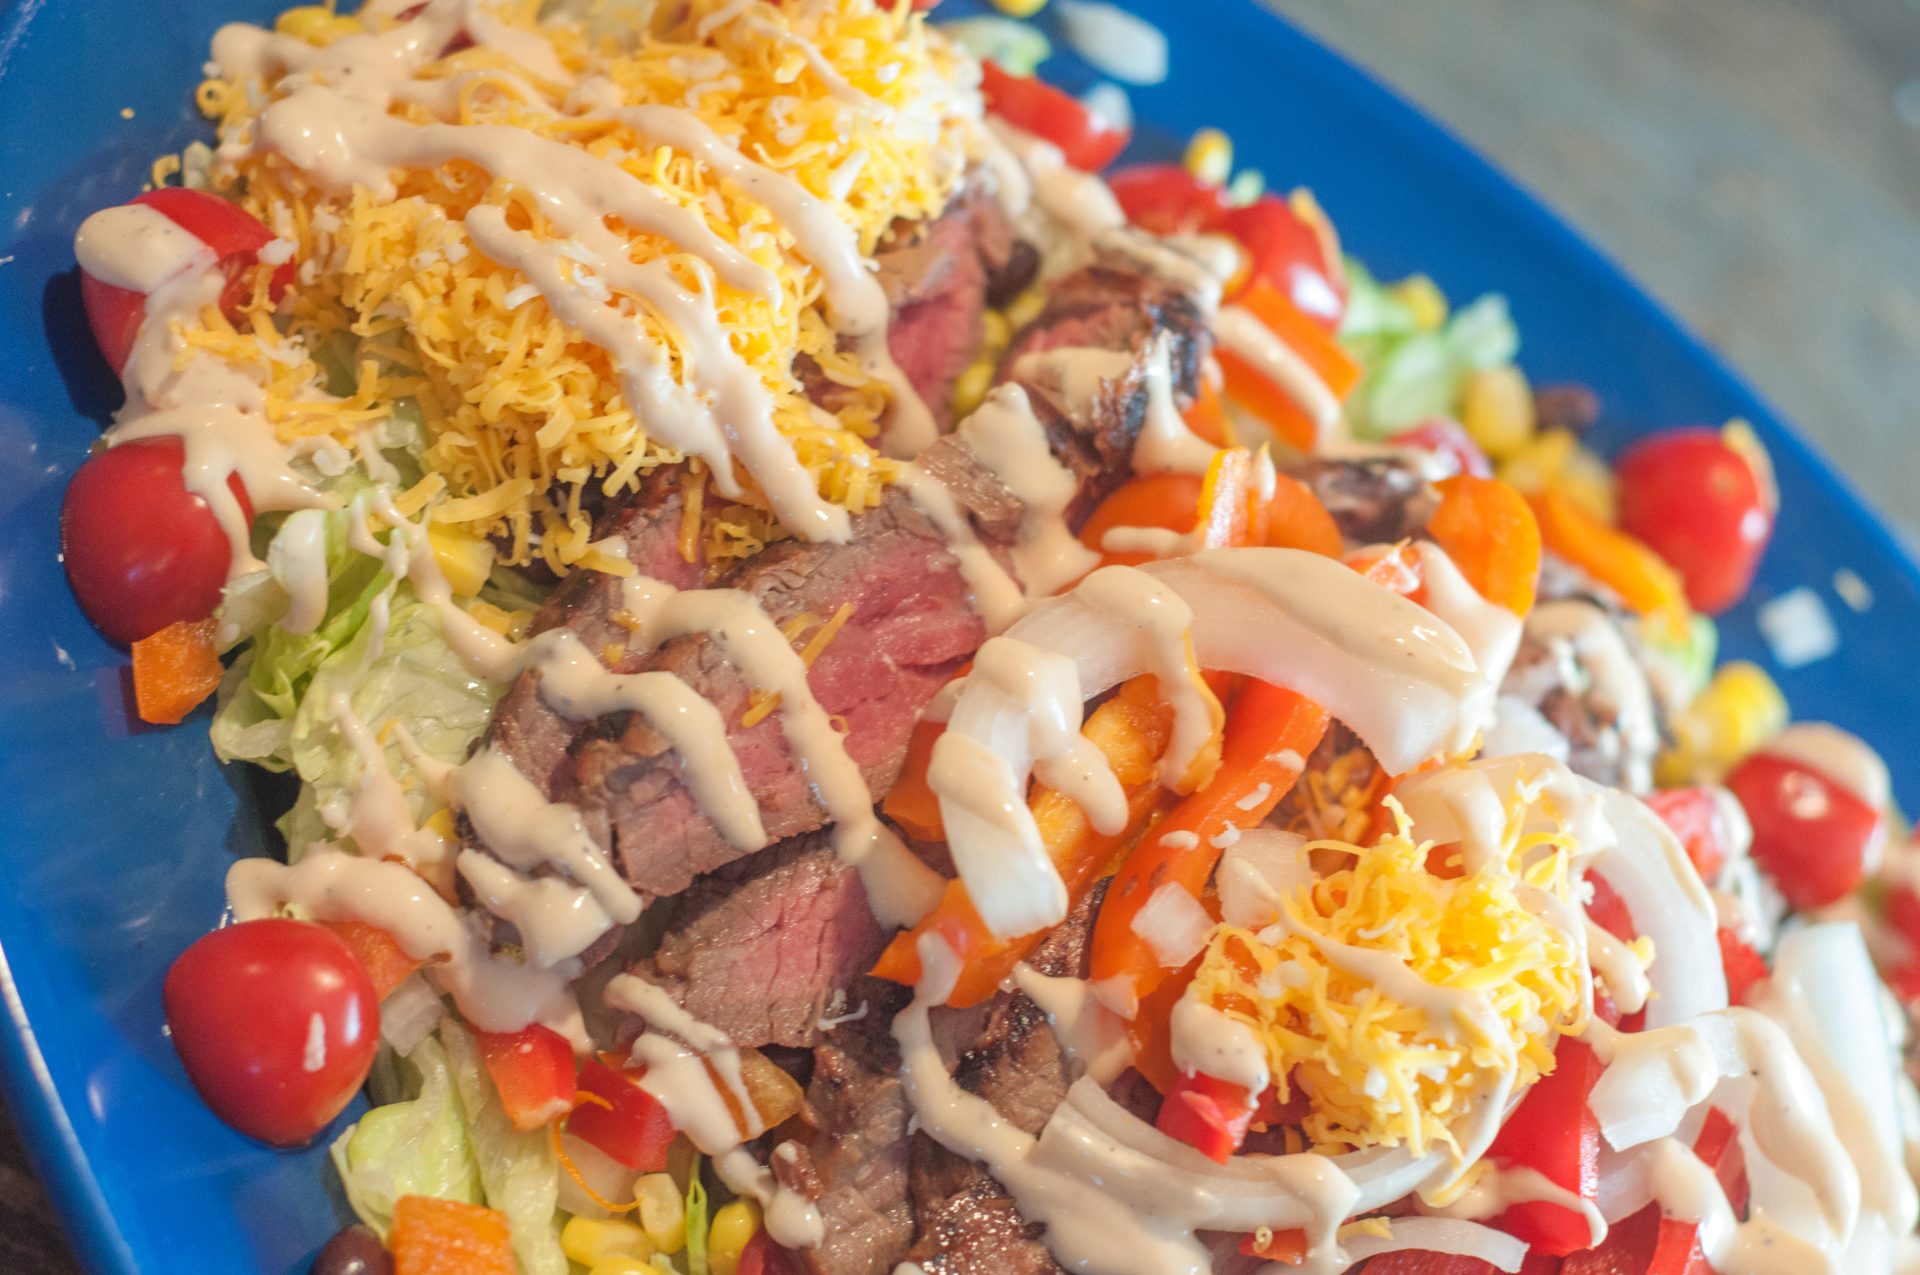 This Southwest Steak Fajita Salad made with a flank steak is super easy to throw together while the steak is on the grill and is super delicious!